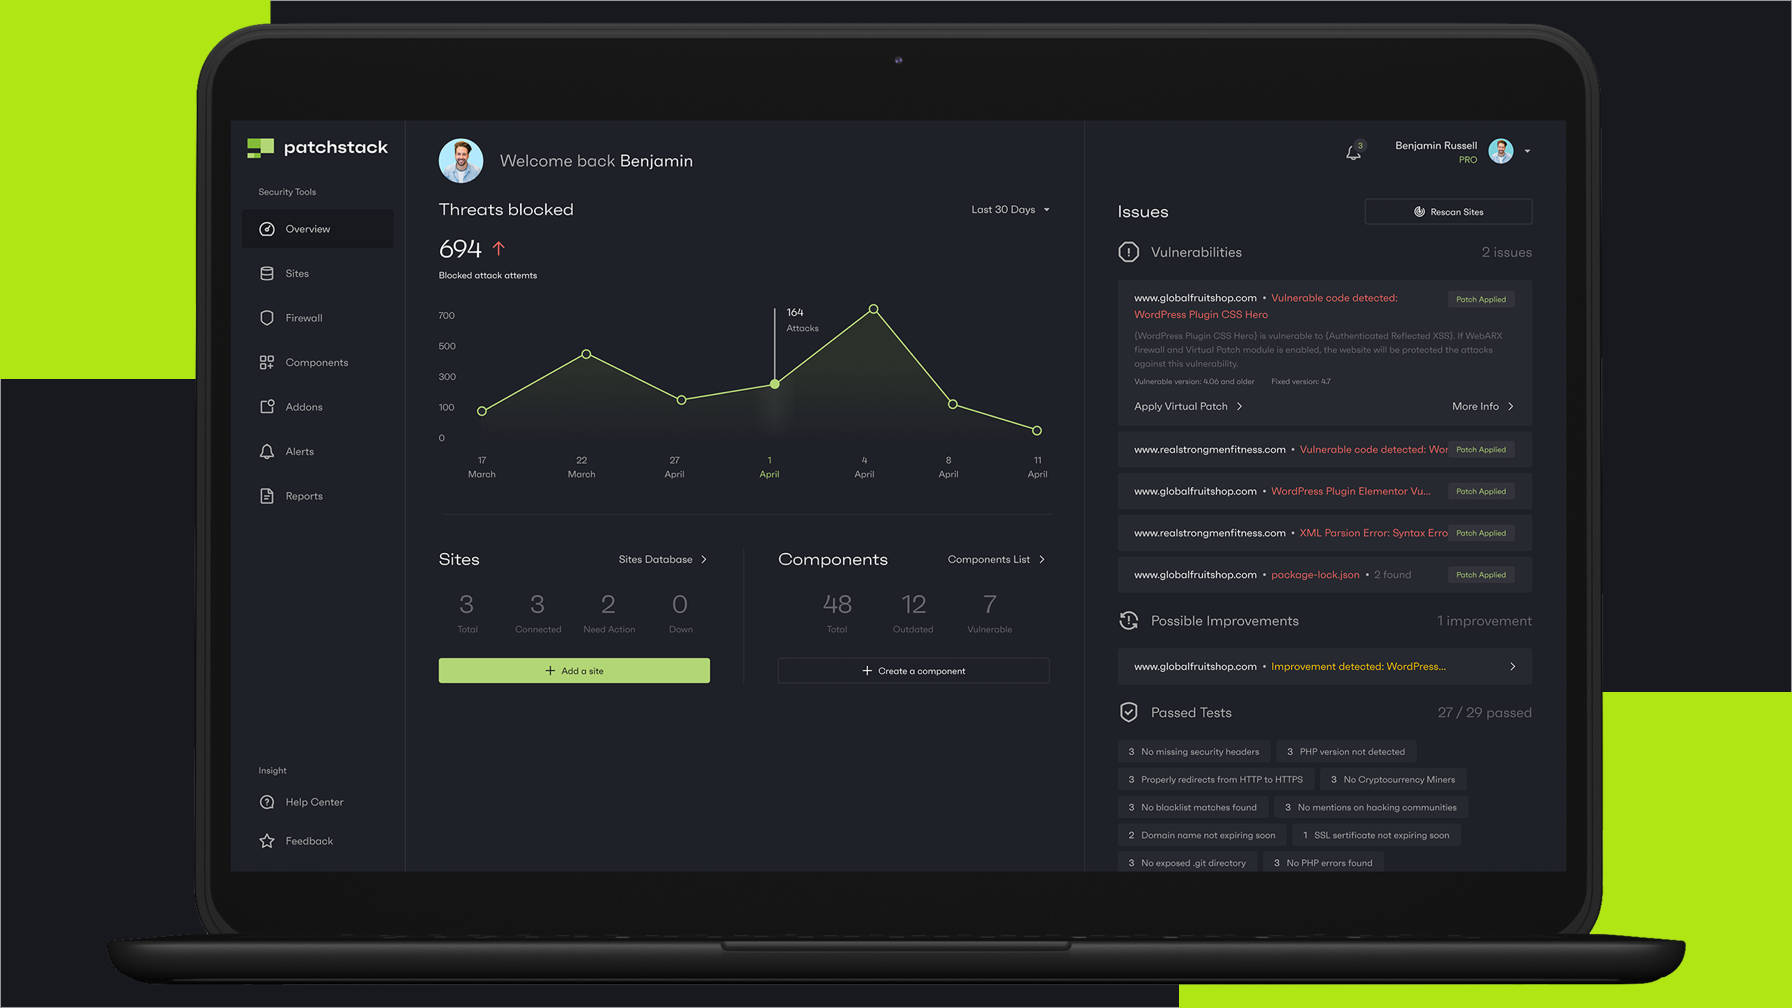 Patchstack dashboard screen with vulnerability details and more.